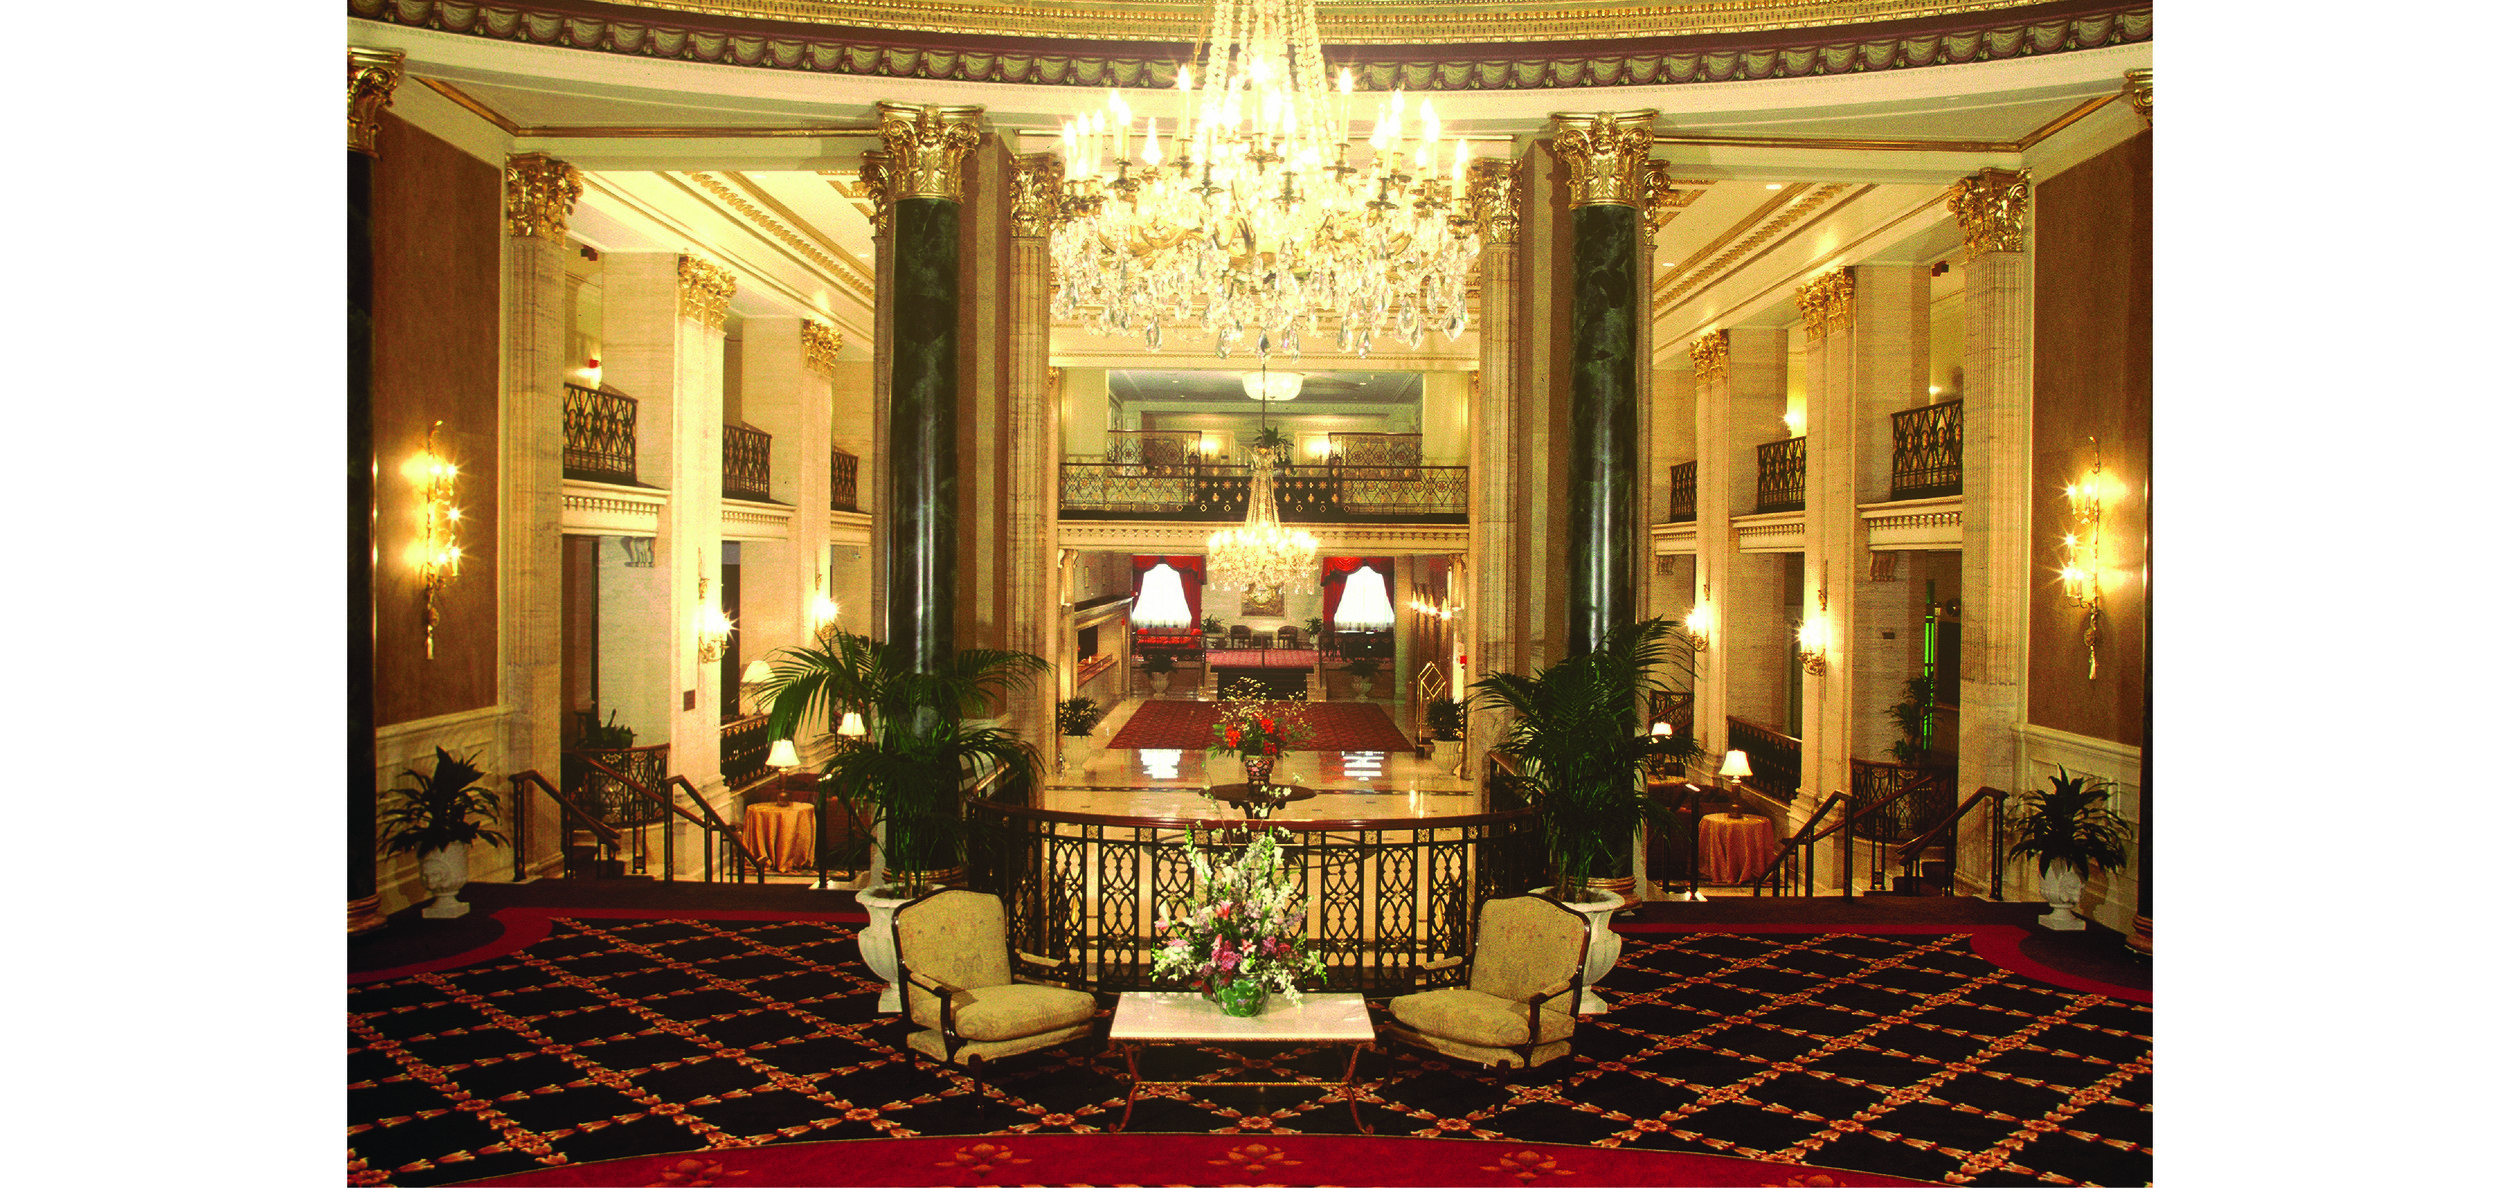 The Palm Room